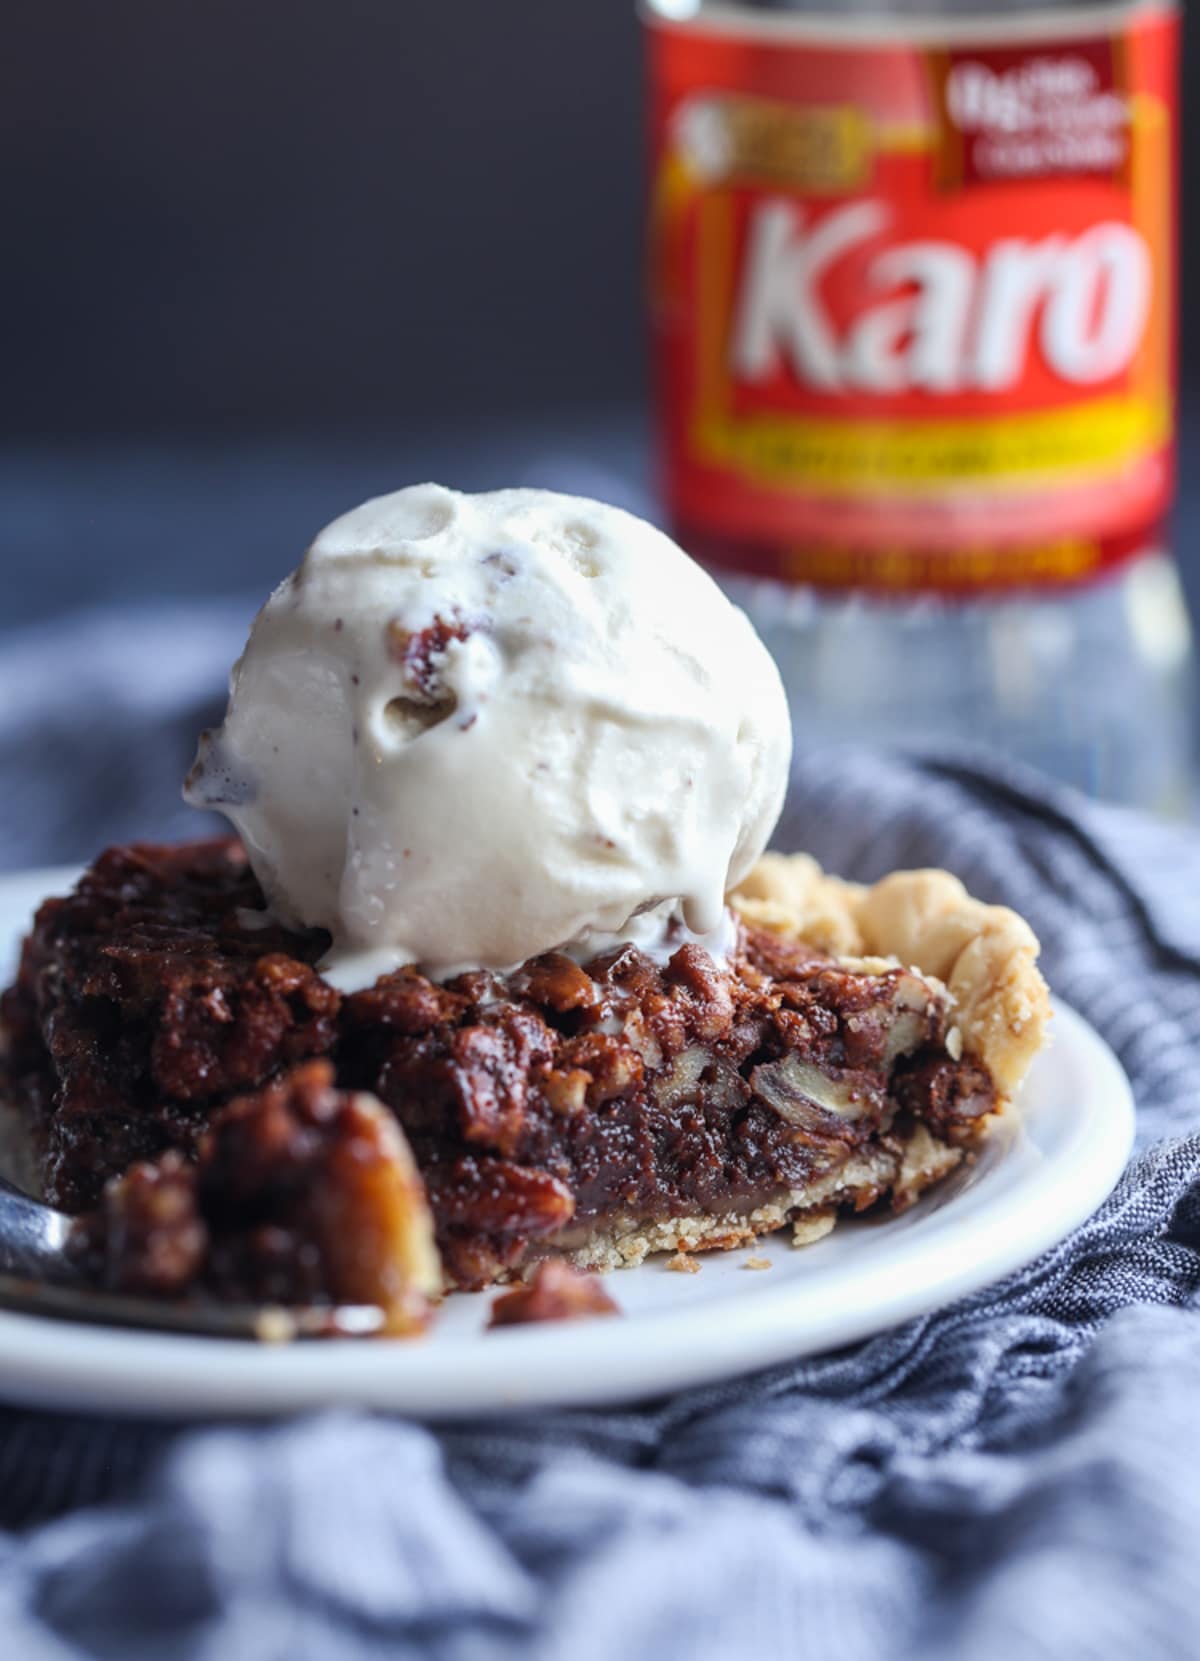 A slice of chocolate pecan pie on a white plate with ice cream and a bottle of Karo syrup in the background